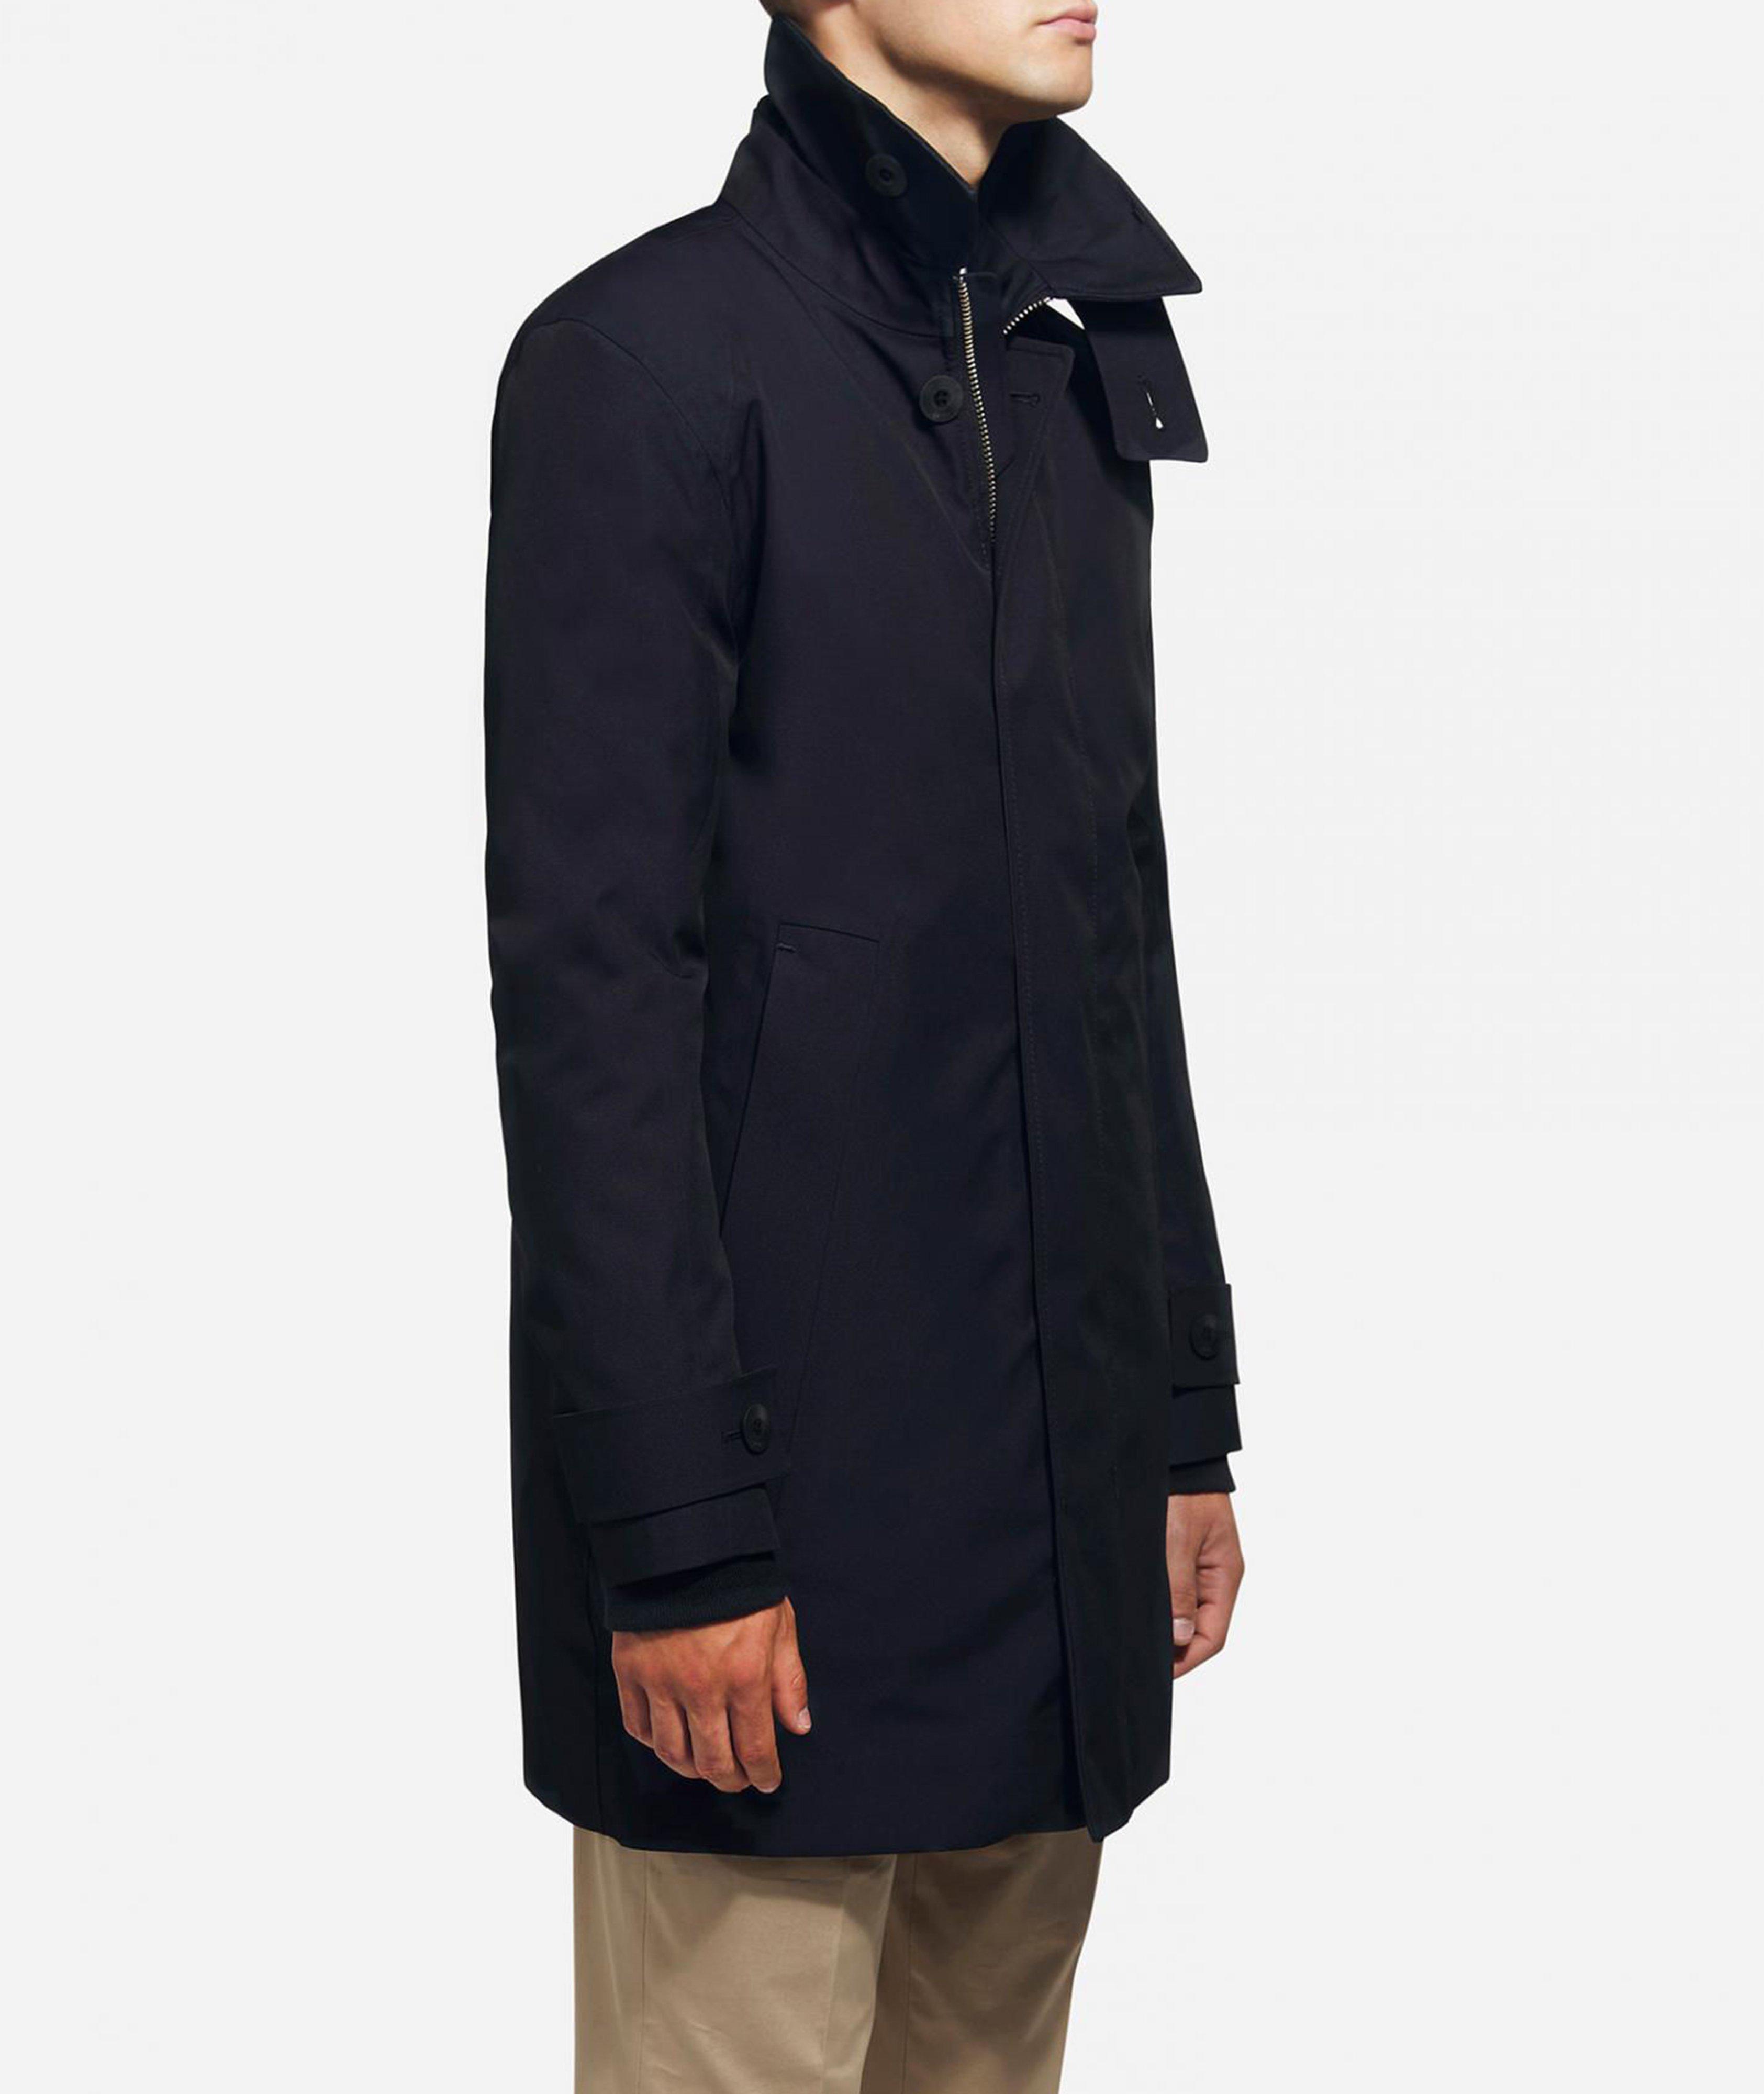 ZOOM Tech Touch Business Parka image 3